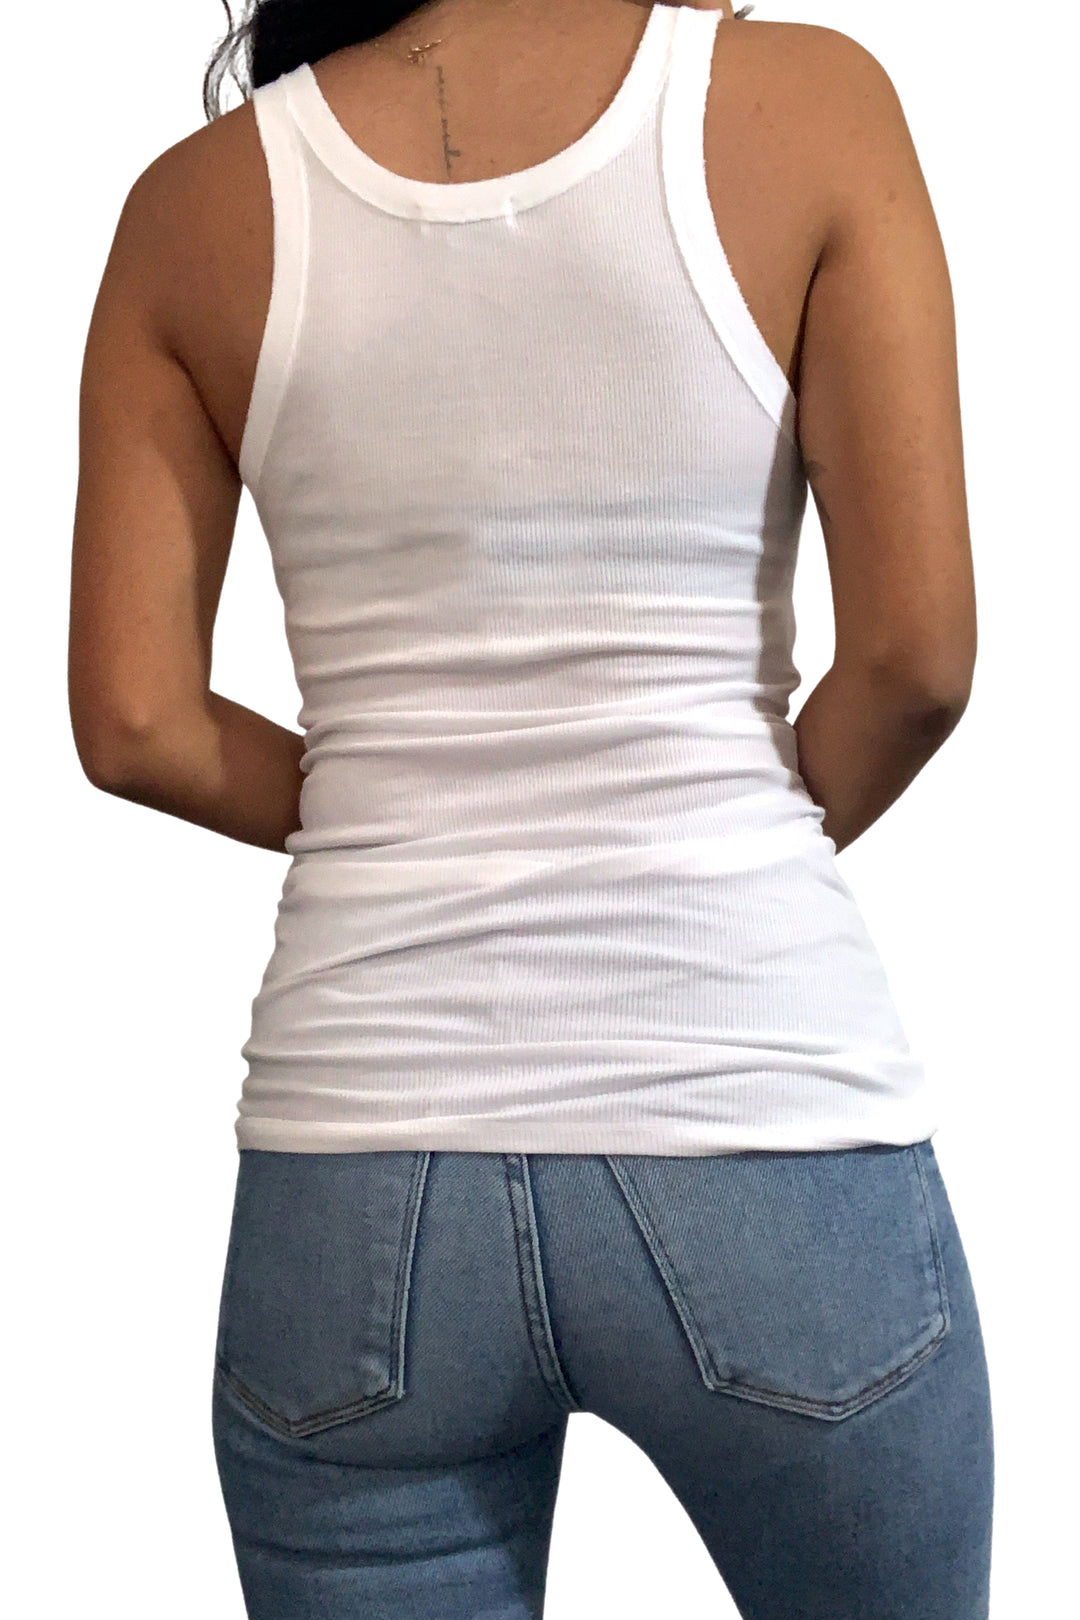 RAW EDGE TANK-SOLID - Kingfisher Road - Online Boutique